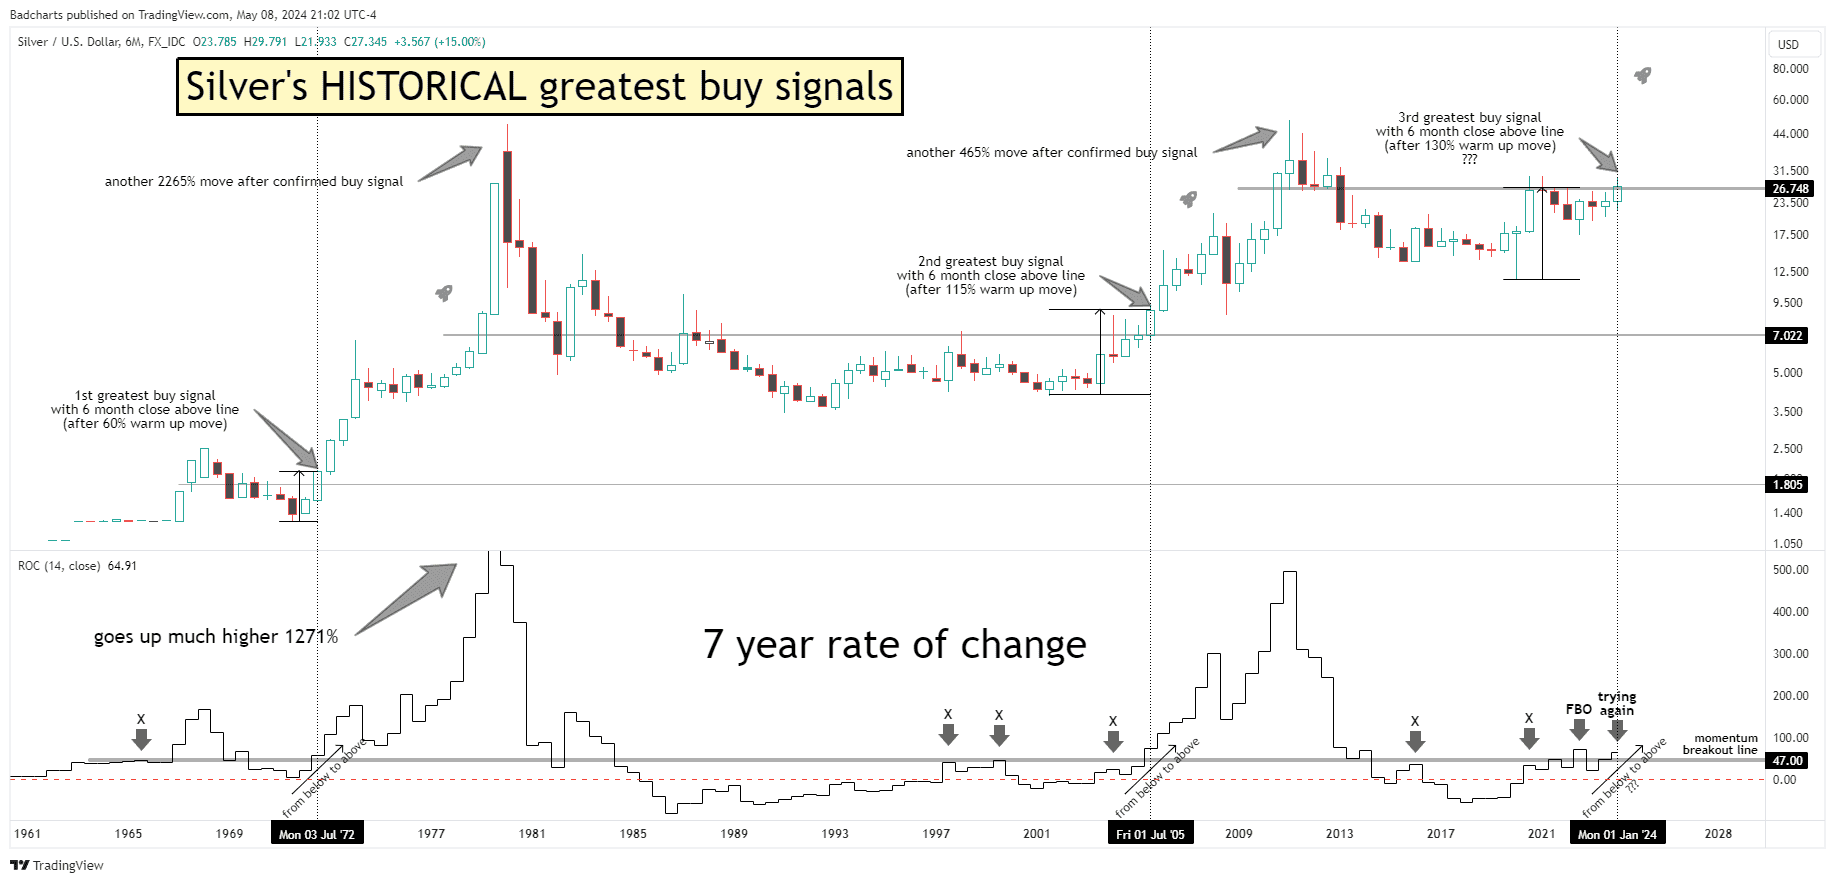 Chart of Silvers historical greatest buy signals